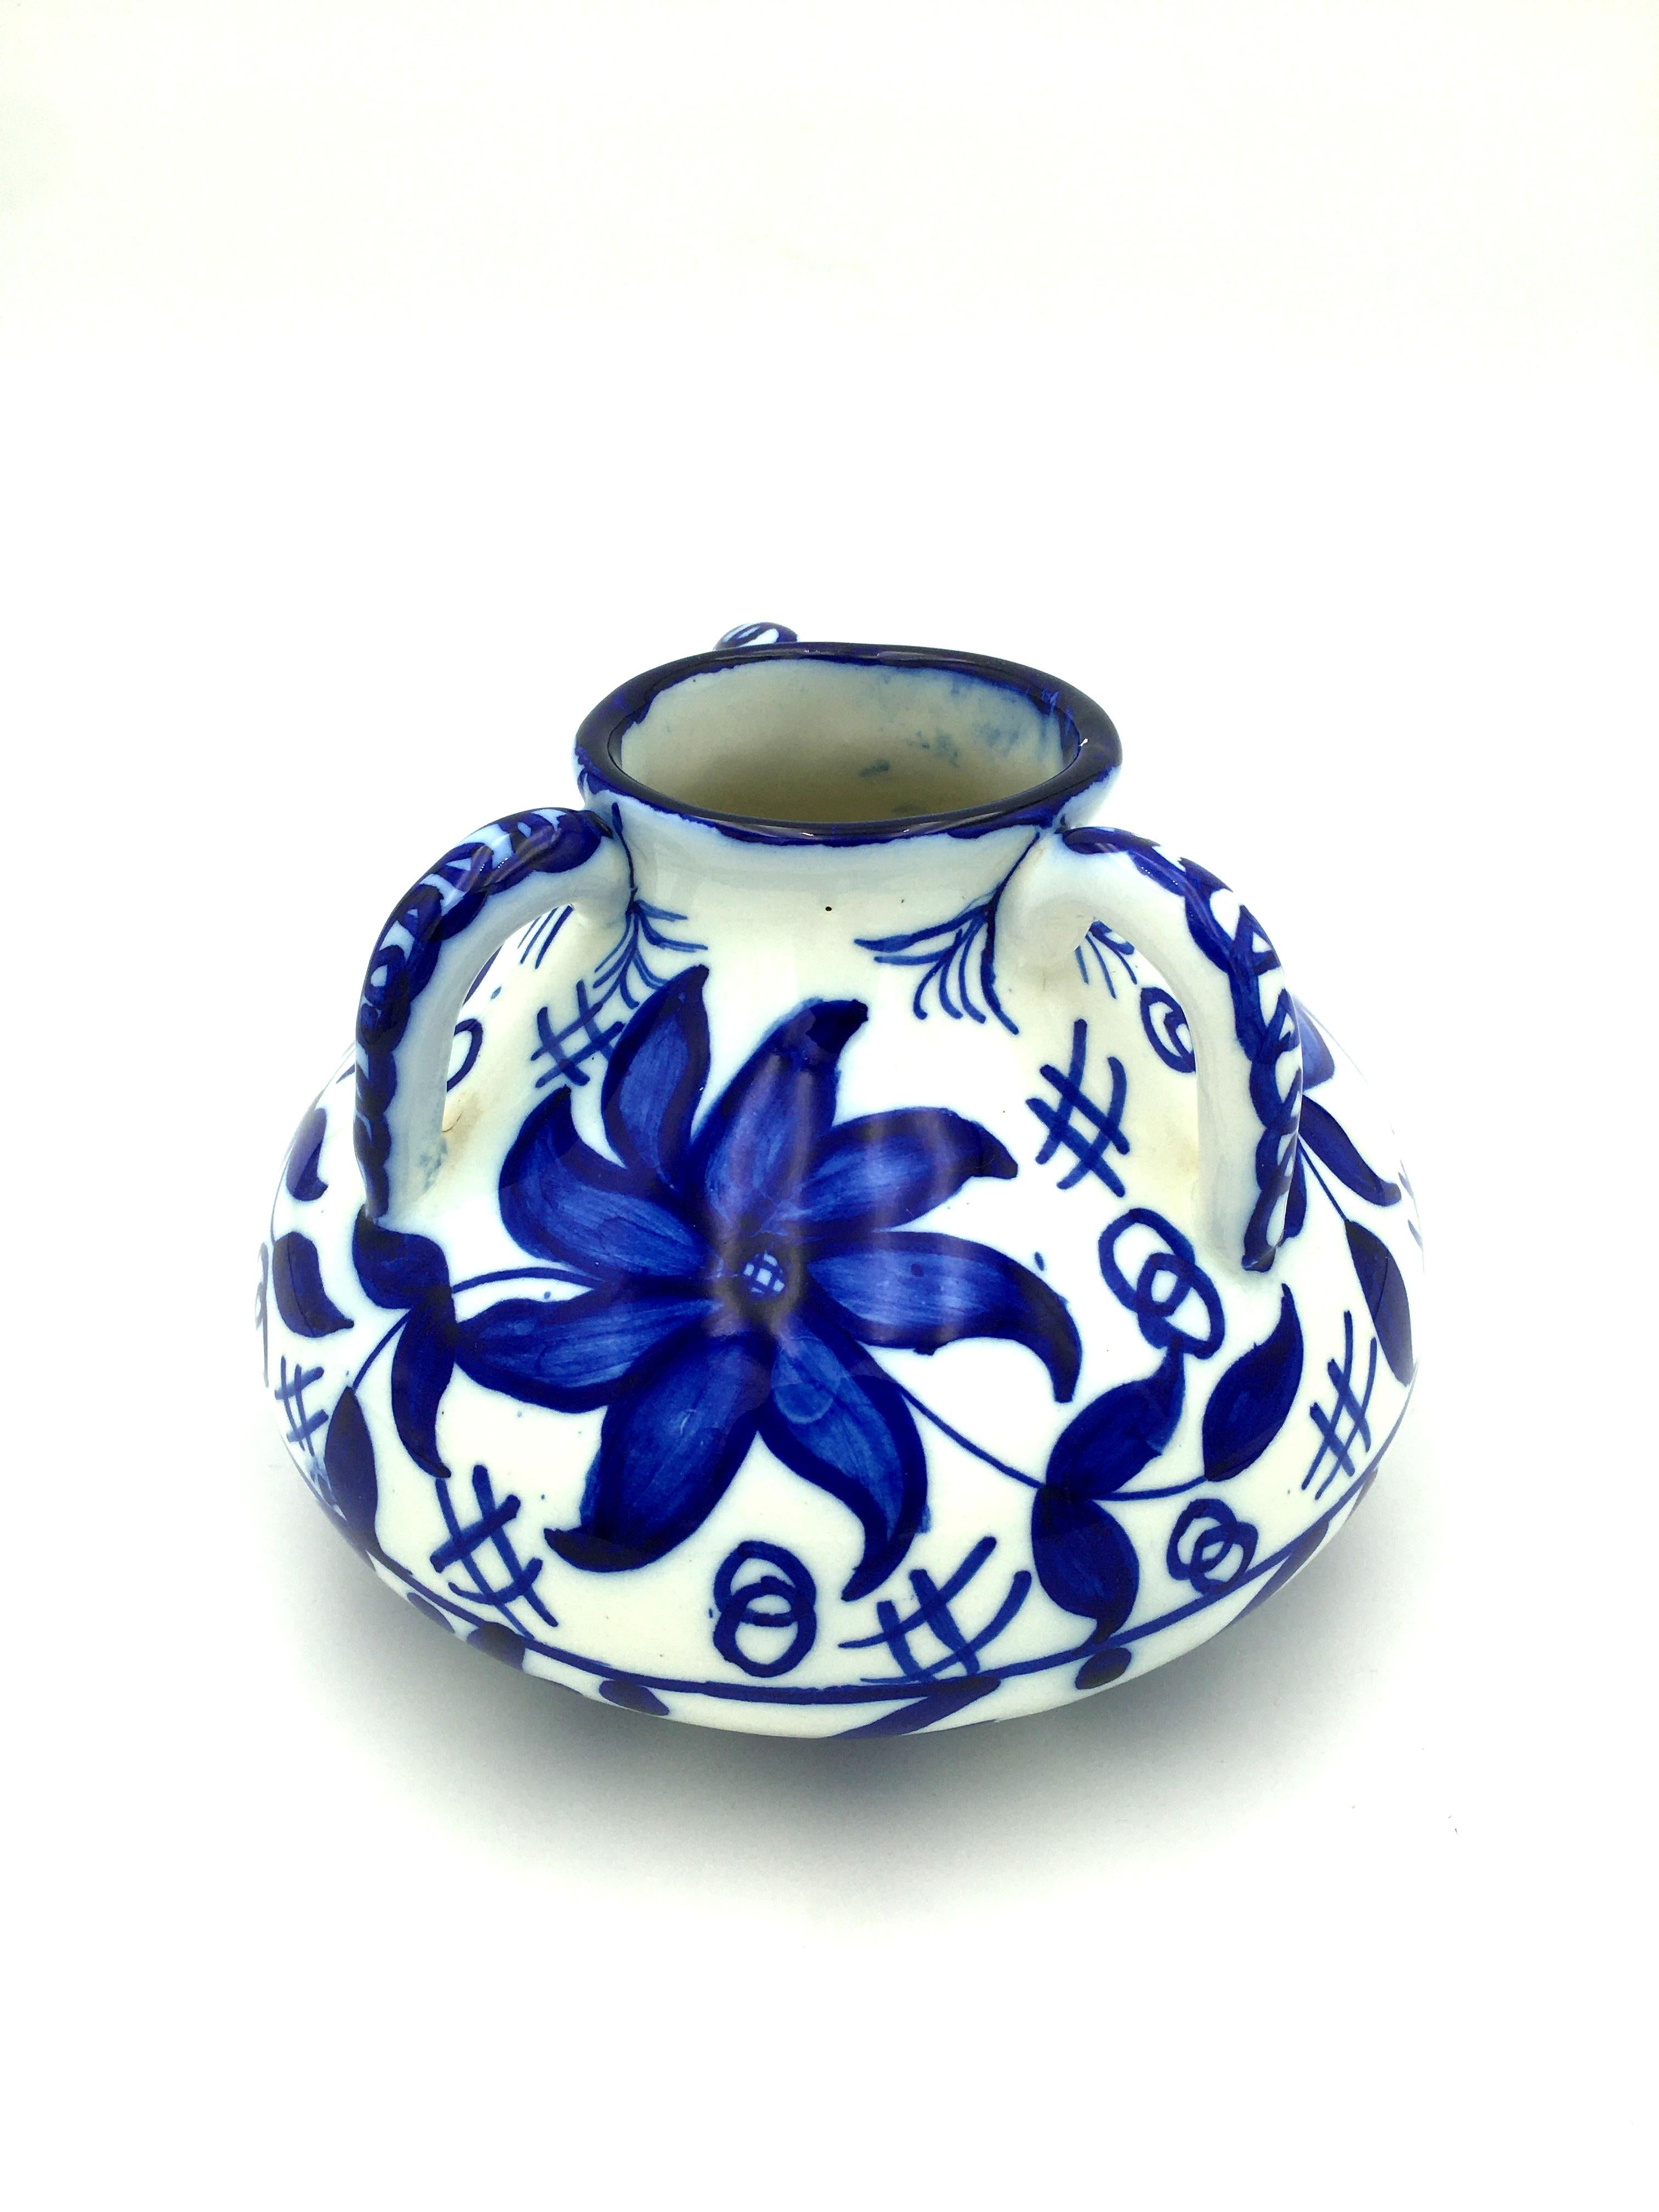 Lovely handmade jar of blue and white Granada Fajalauza ceramic with 3 handles decorated by hand with flowers and geometric motifs. Spain, Andalusia, Granada. Period: Early 20th century. Conditions: Very good. Wear consistent with age and use.